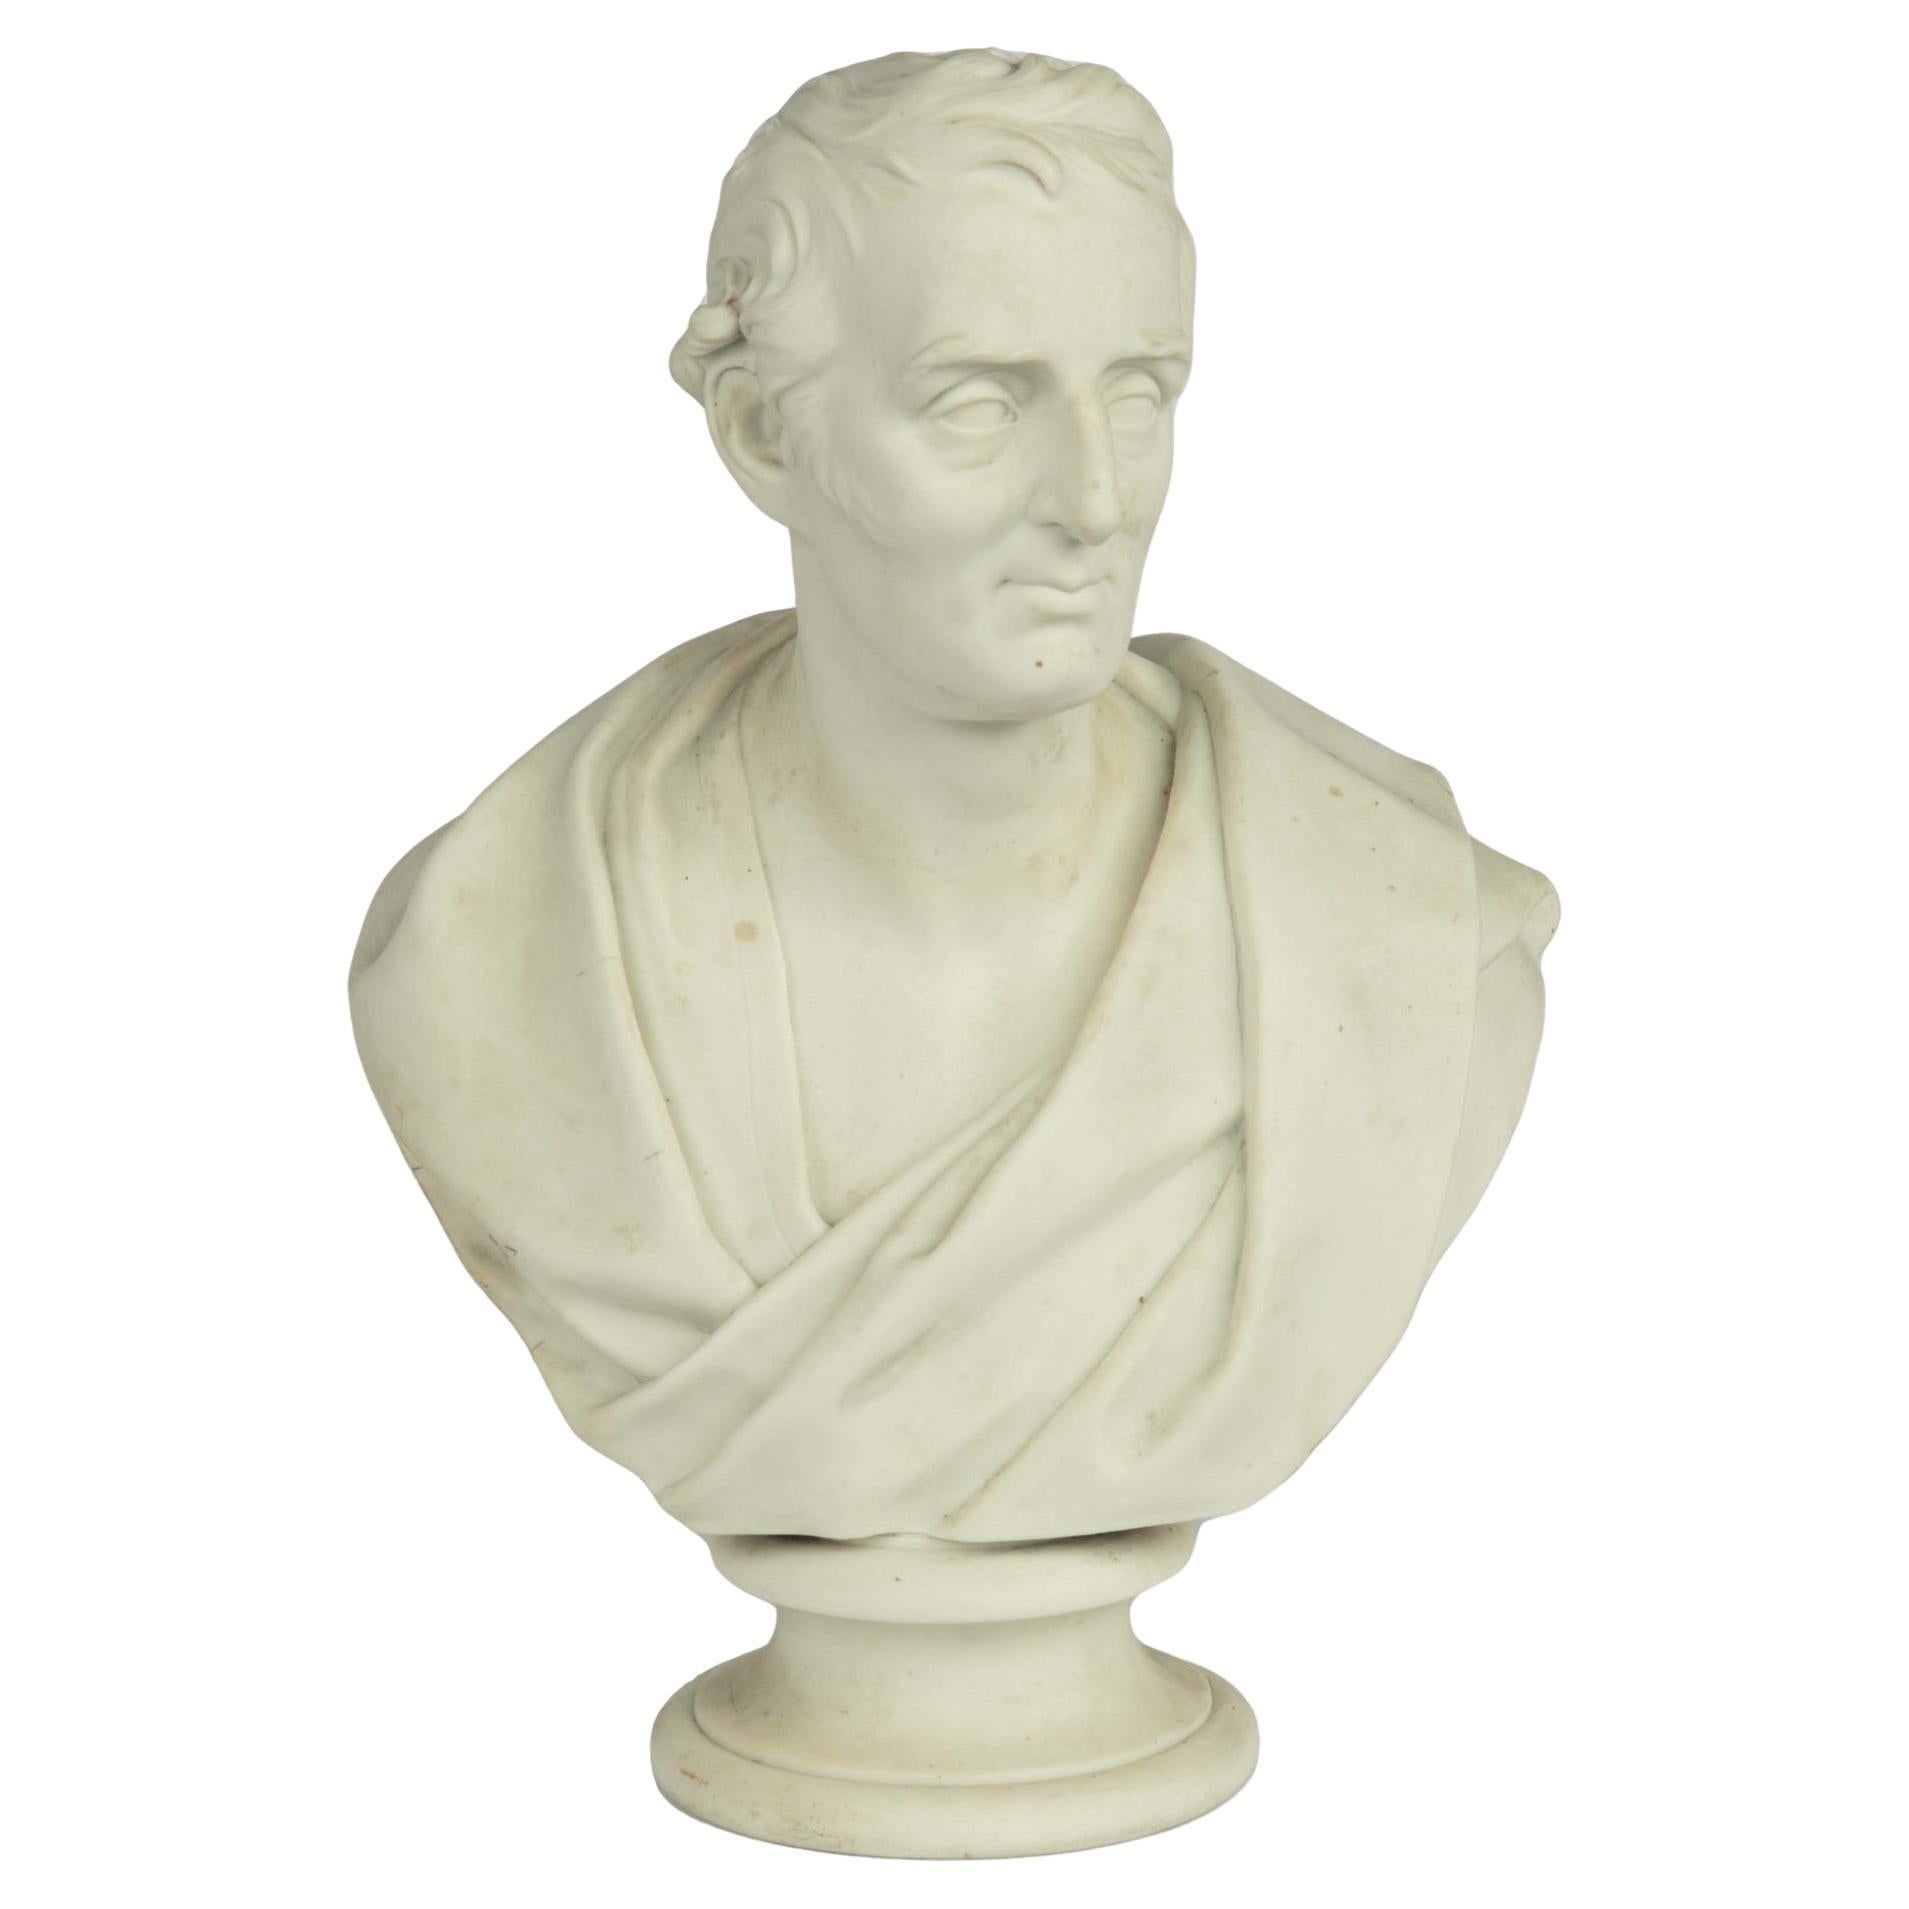 A white Parianware bust of the Duke of Wellington by E W Wyon